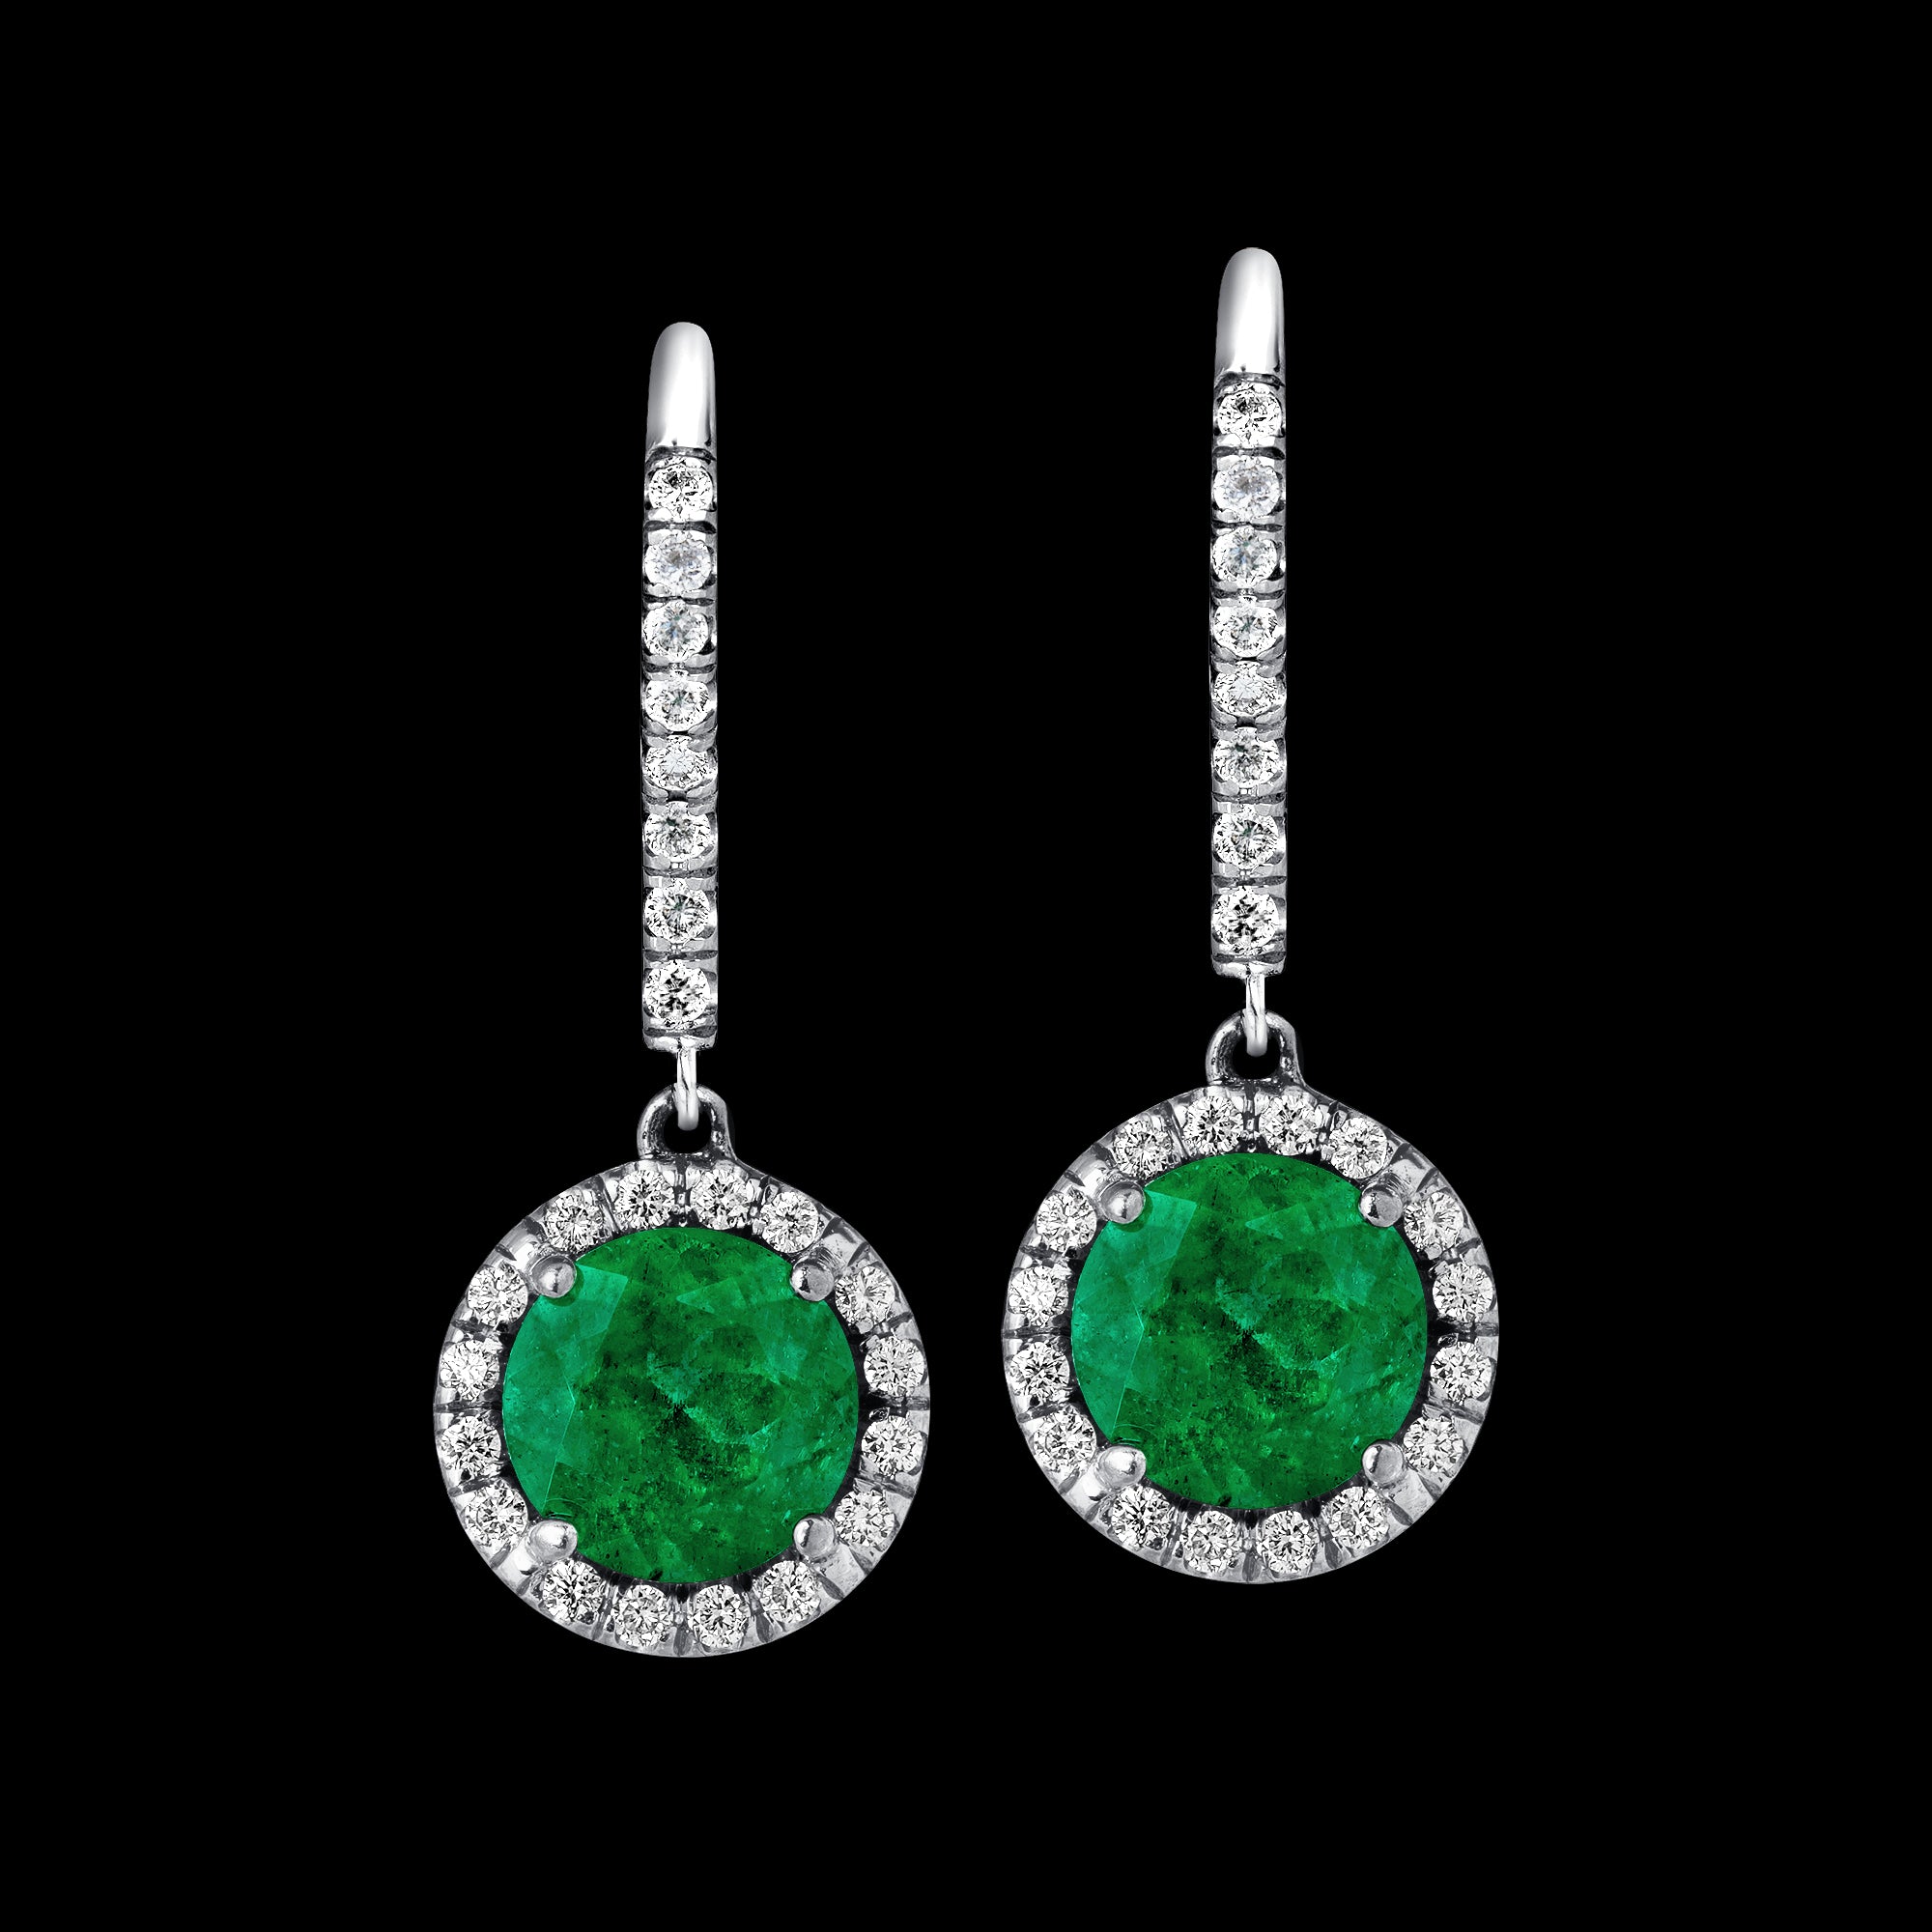 Round Emerald Halo Drop Earrings - 2.01ct TW